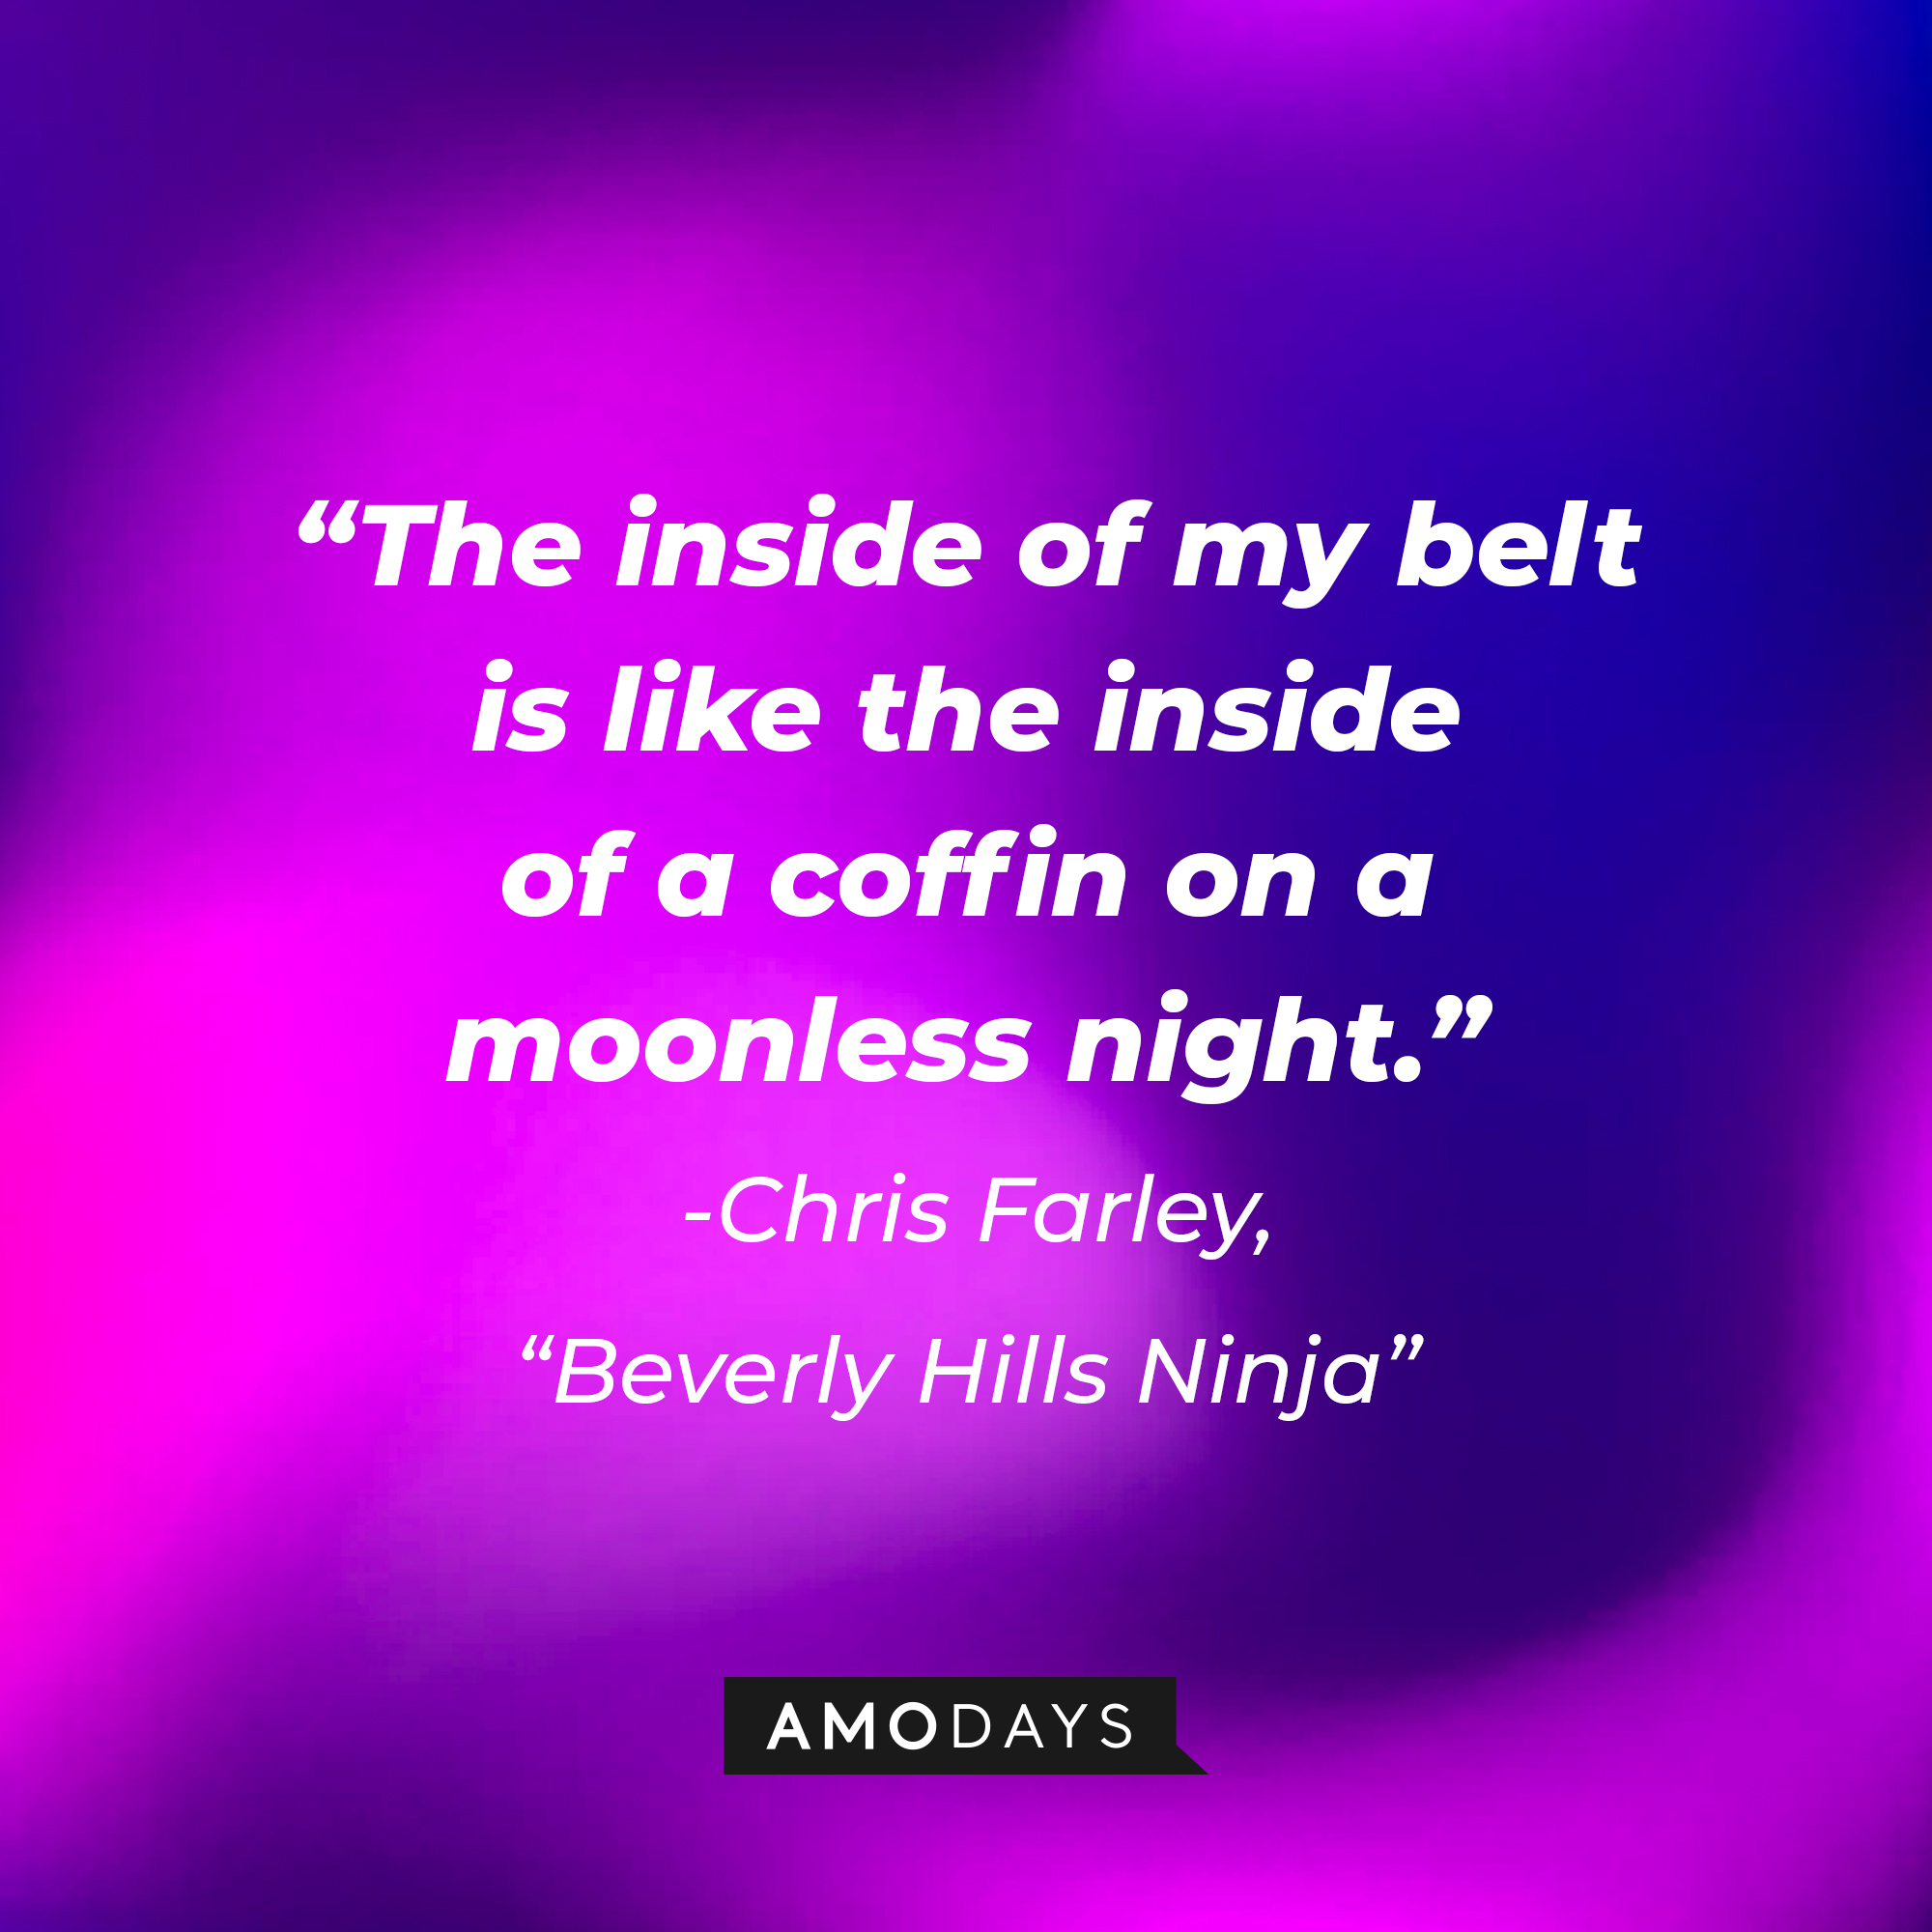 Chris Farley's “Beverly Hills Ninja" quote: “The inside of my belt is like the inside of a coffin on a moonless night.” | Source: Amodays